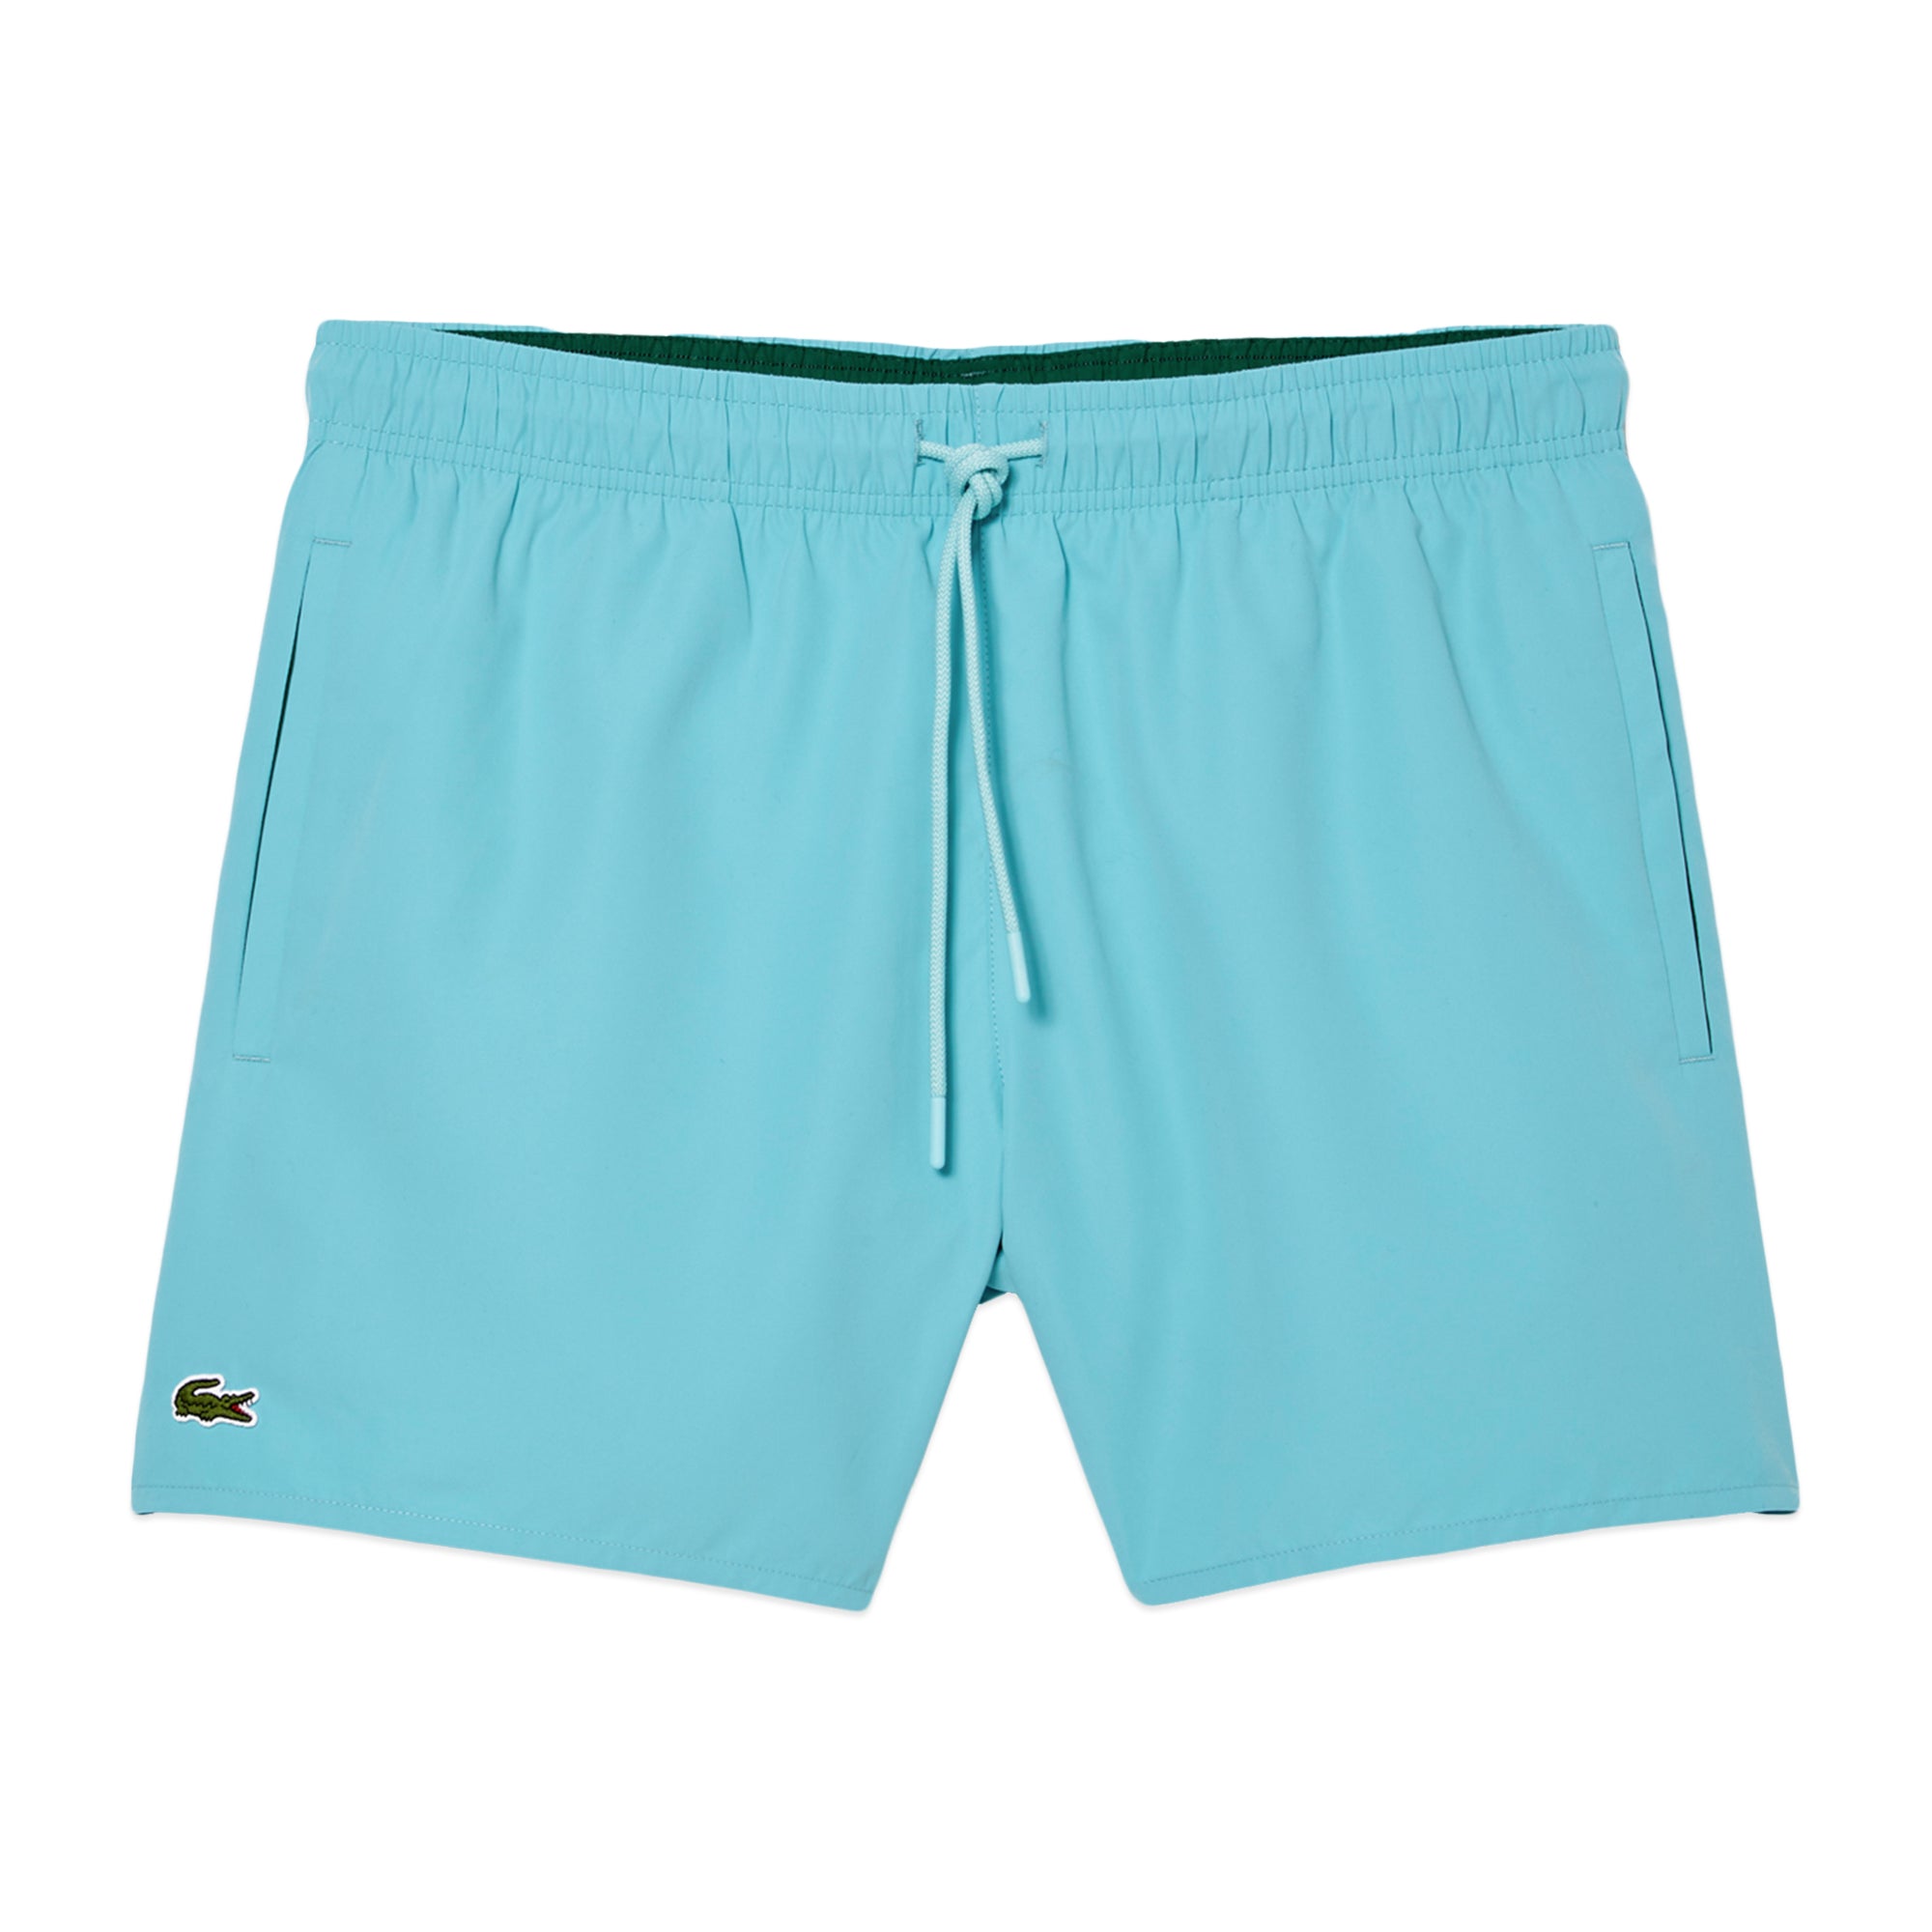 Lacoste Light Quick Dry Swim Shorts MH6270 - Littoral Turquoise